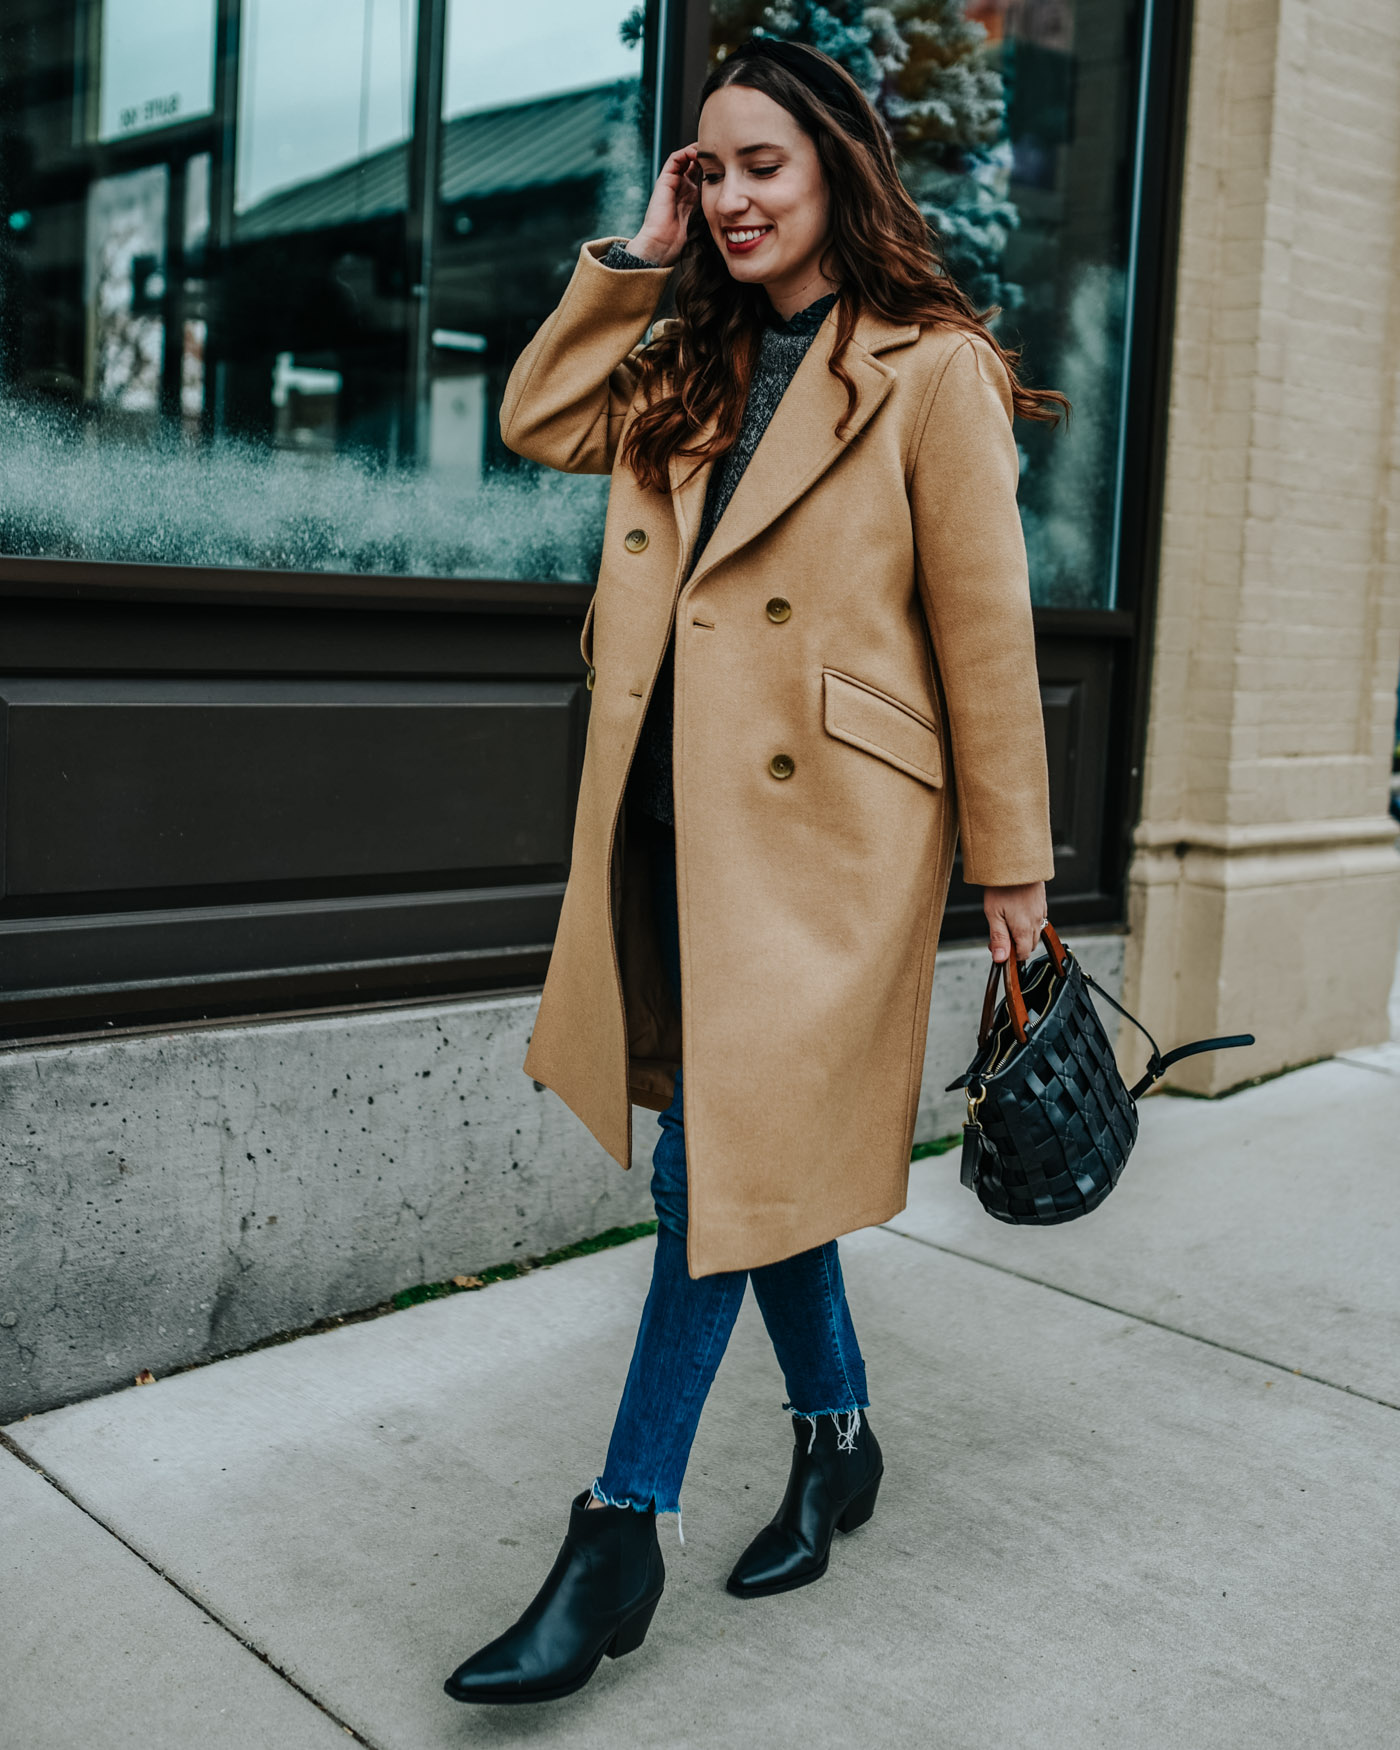 My 5 Wardrobe Winter Essentials by popular Tennessee fashion blog, Lone Star Looking Glass: image of a woman walking outside in a city and wearing a pair of Everlane The Western Boot, Everlane The Oversized Alpaca Crew, black knotted headband and Everlane The Italian ReWool Overcoat.